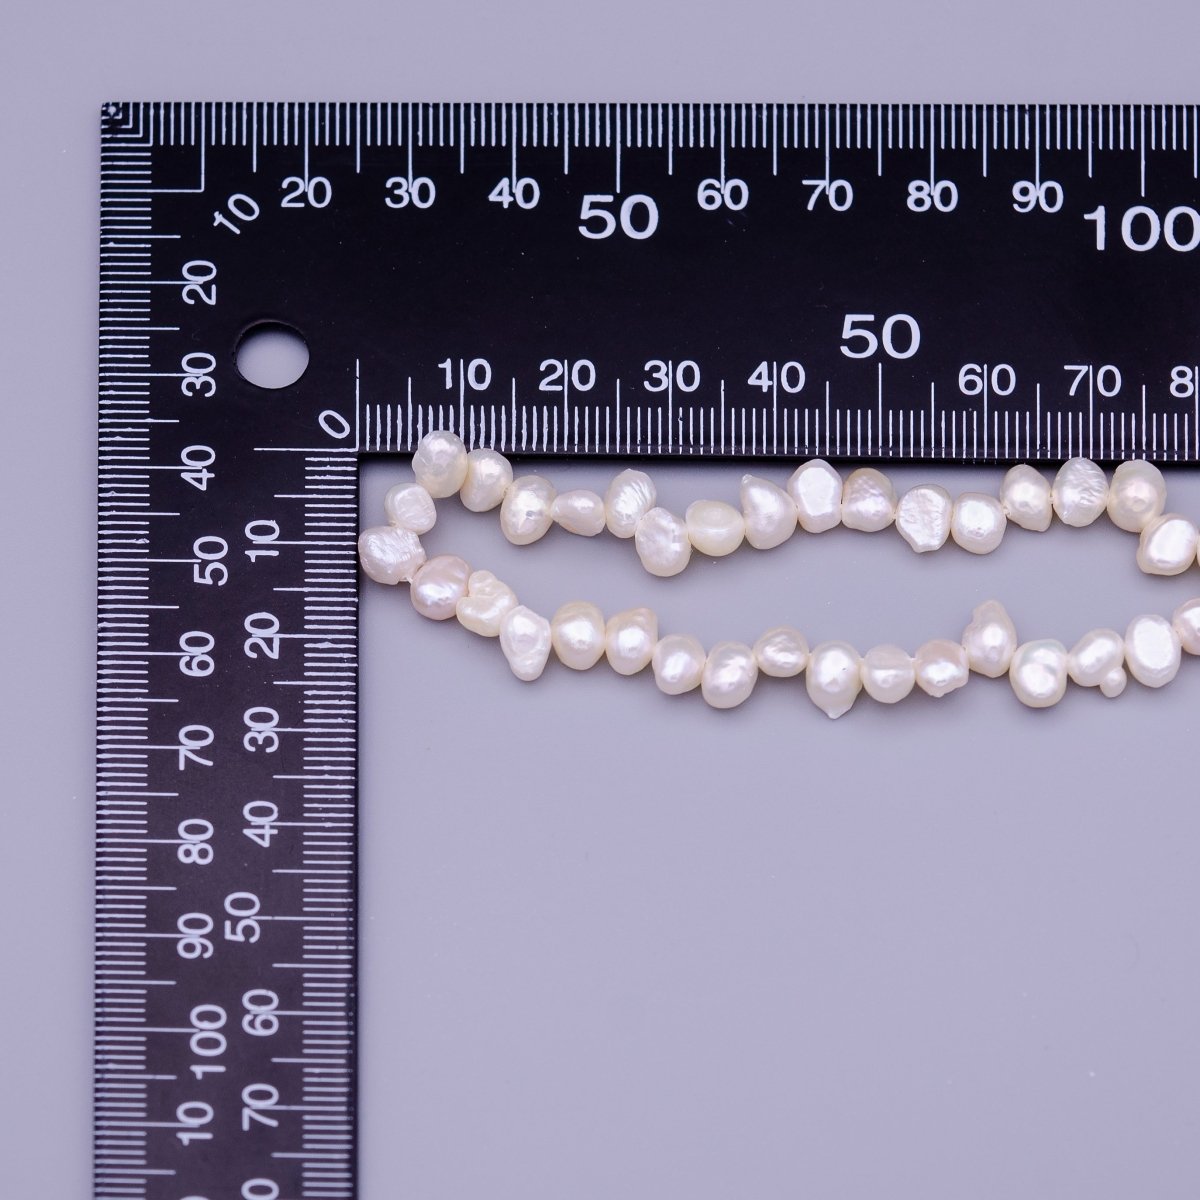 6.7mm - 7.6mm Nugget Seed White Natural Freshwater Pearl 71pcs Full Strand | WA-1317 Clearance Pricing - DLUXCA